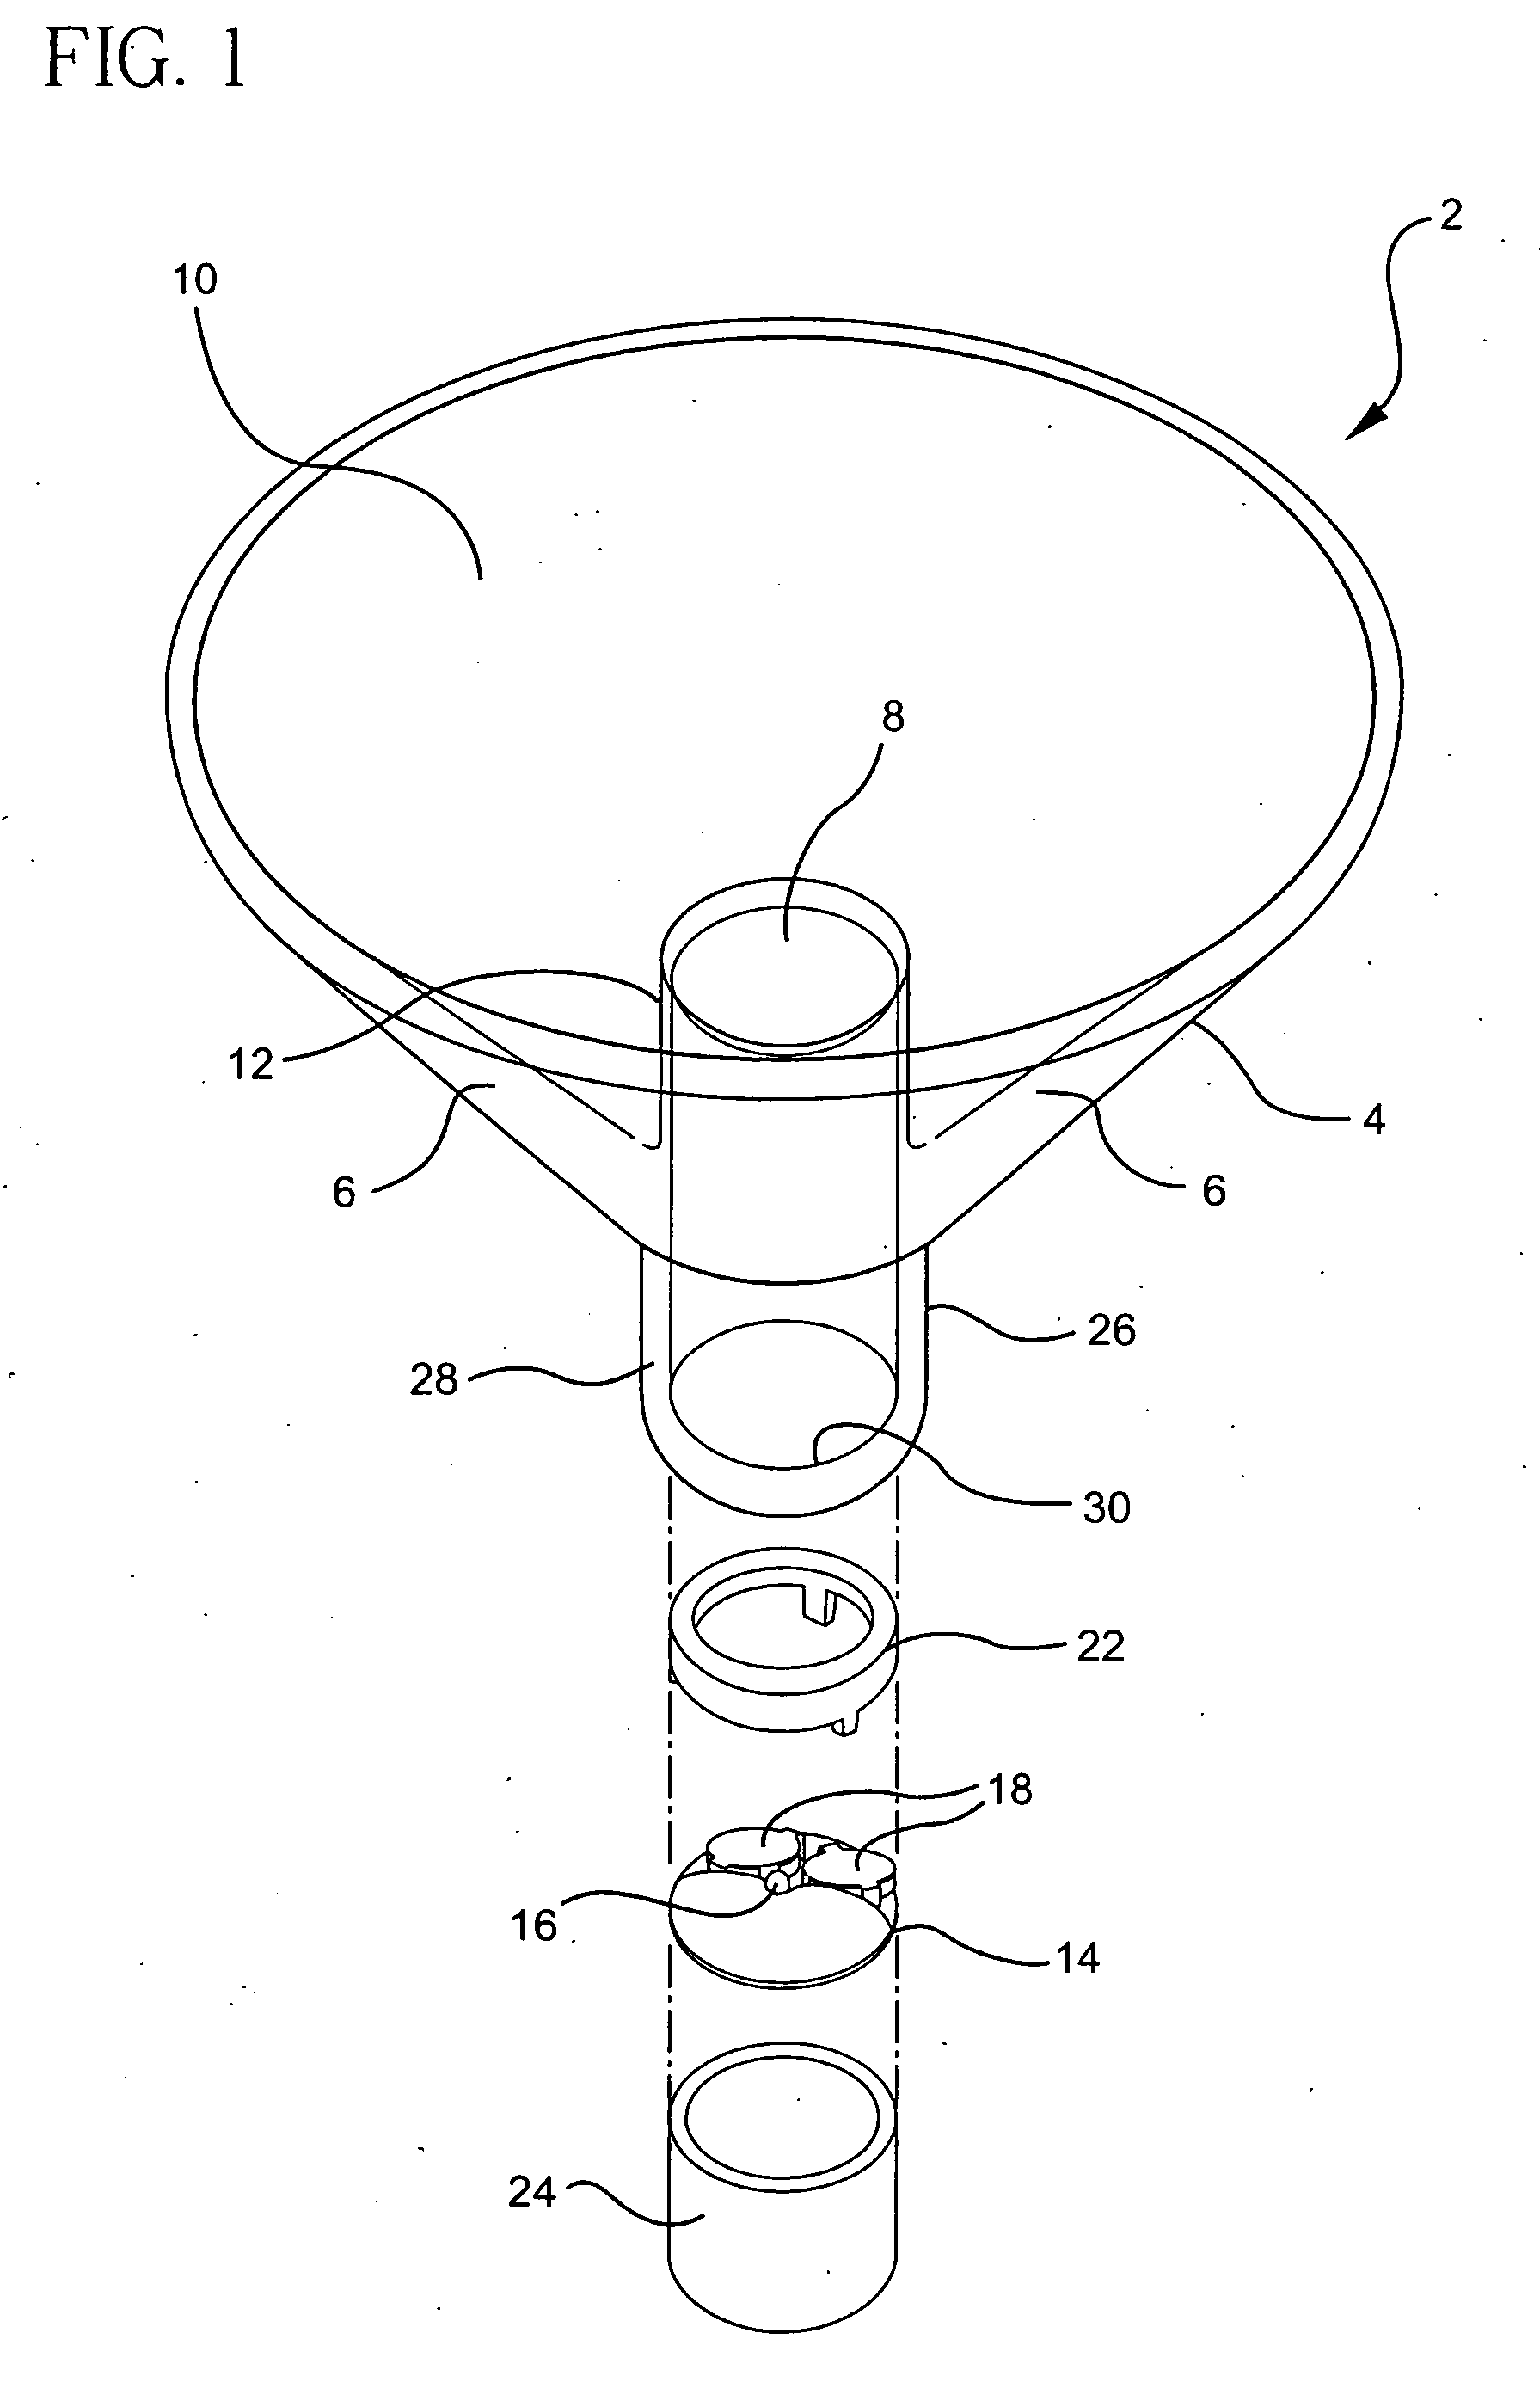 Lighted vessel for attachment to bottle